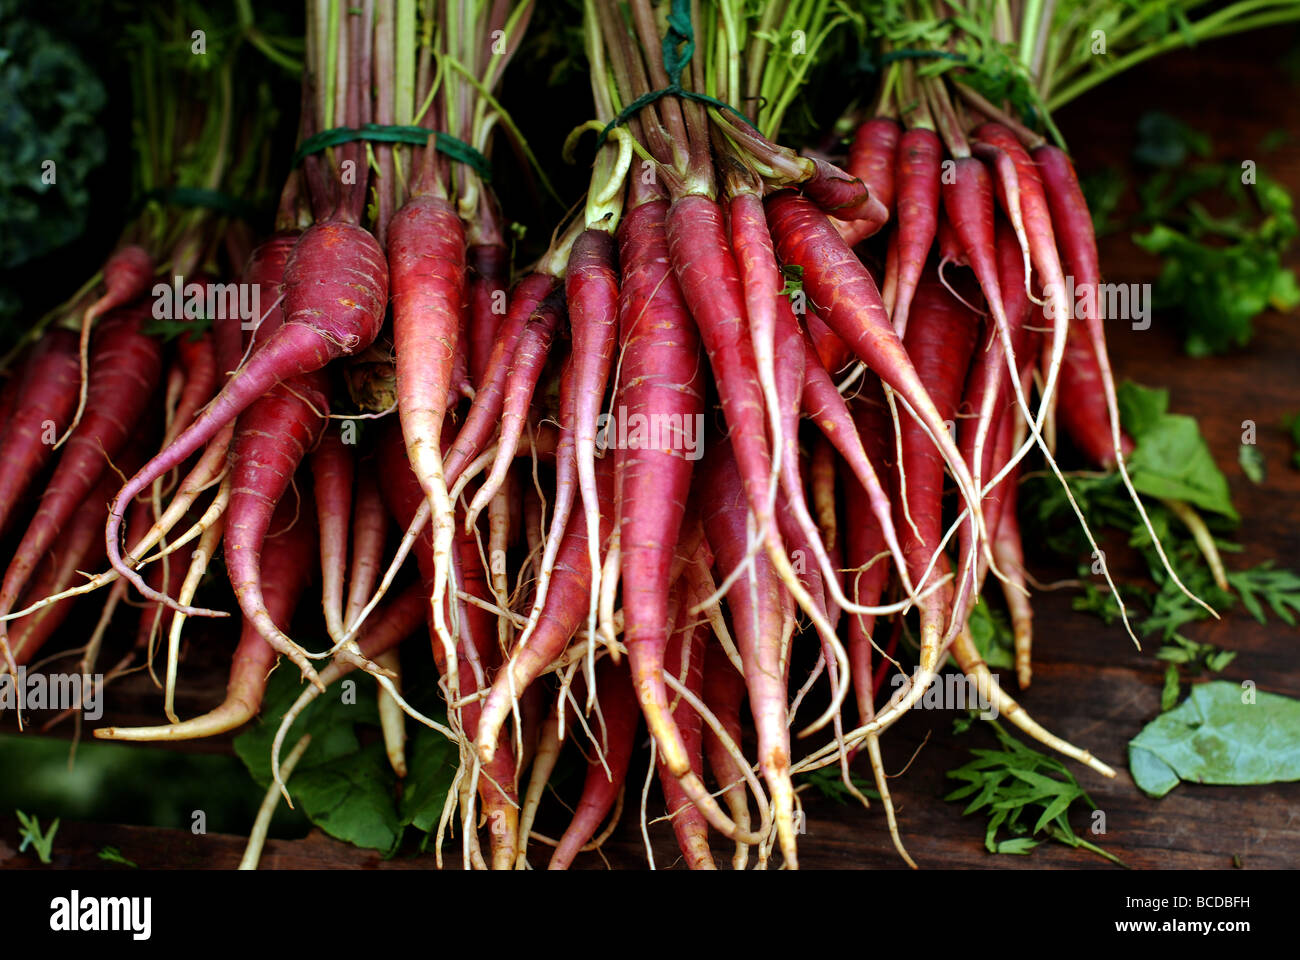 Colorful fruits and vegetables at the Evanston Farmers' Market. Red carrots Stock Photo